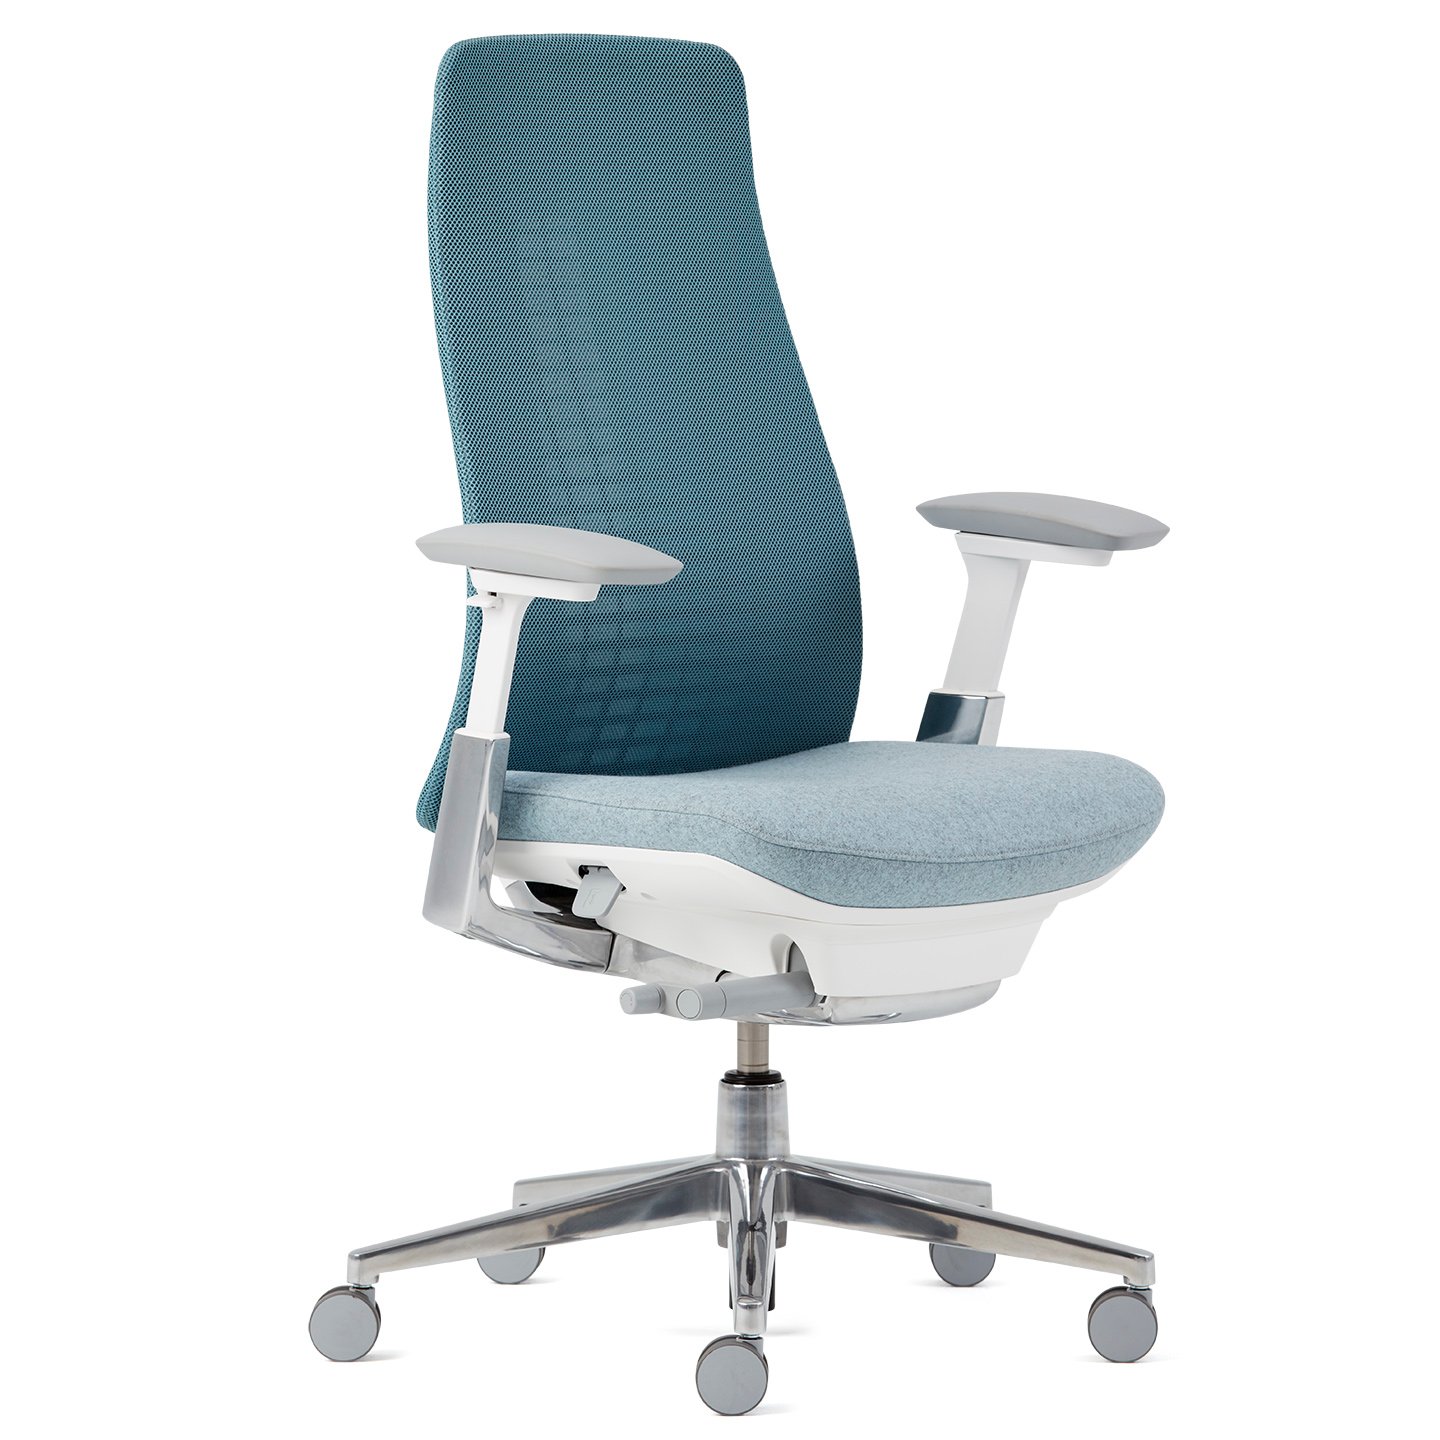 Haworth Fern Task chair in shades of blue upholstery with swivel base, wheels and ergonomic design